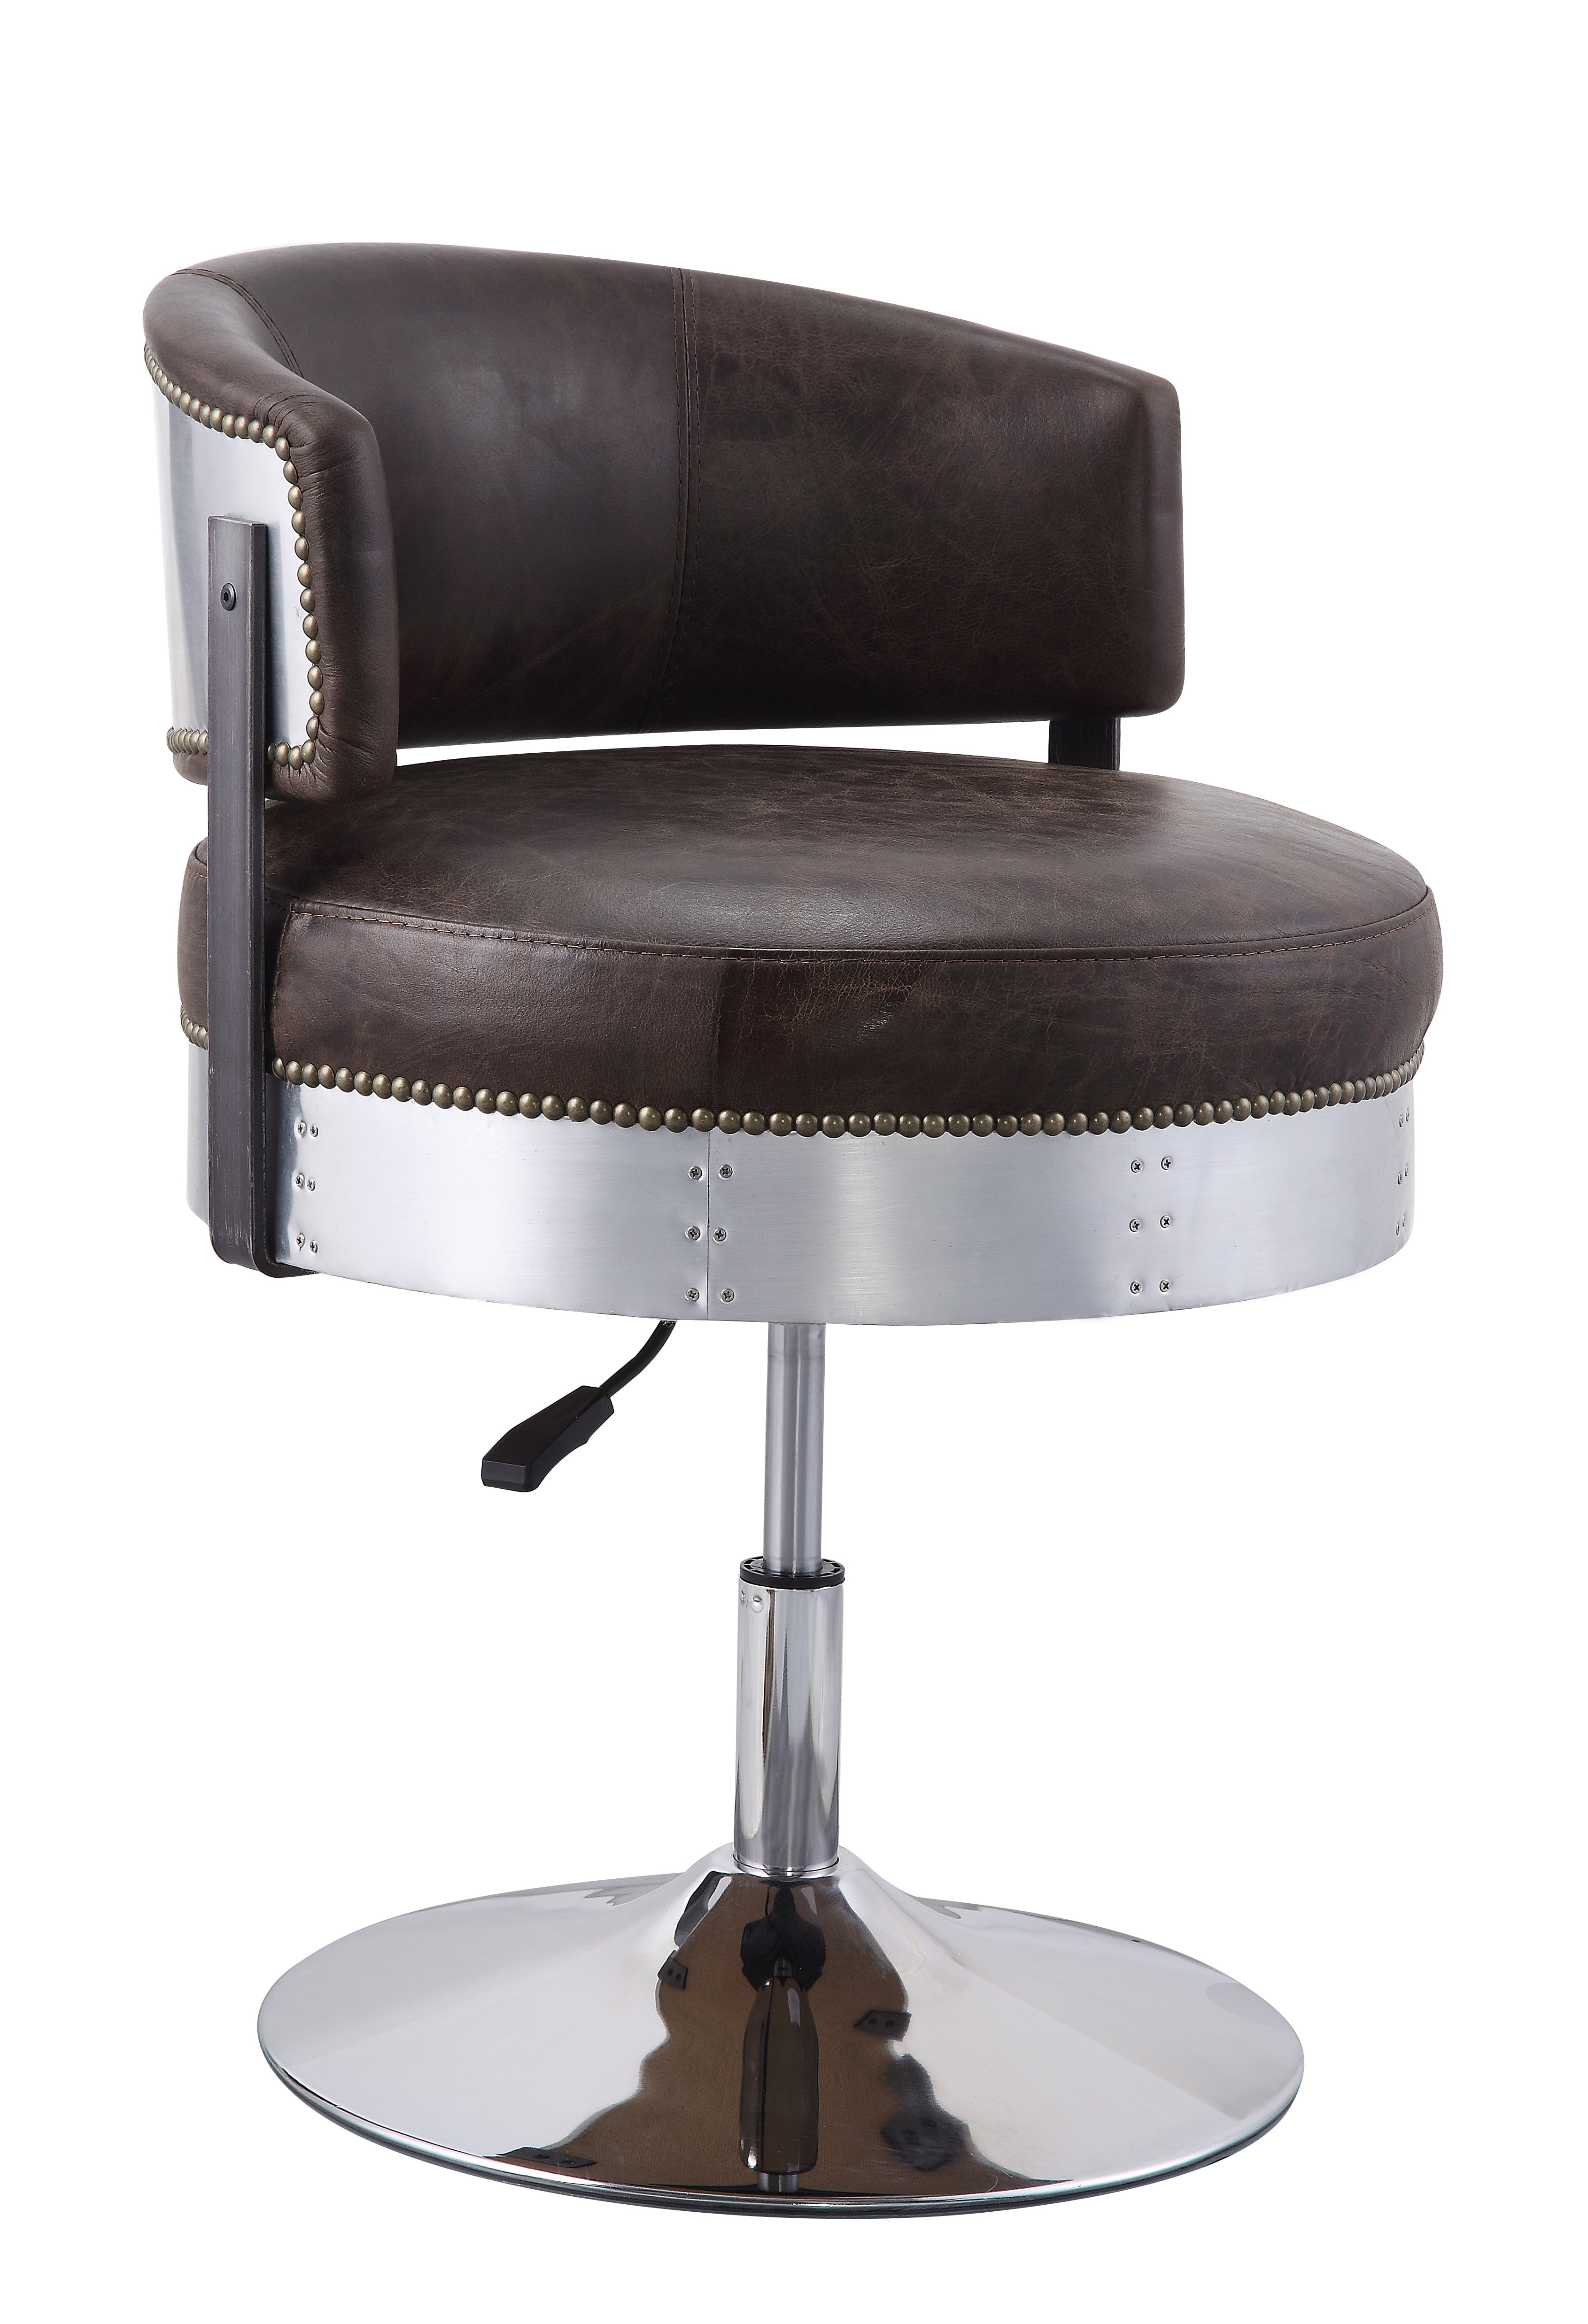 Brancaster Adjustable Chair With Swivel, Top Grain Leather Bar Stools